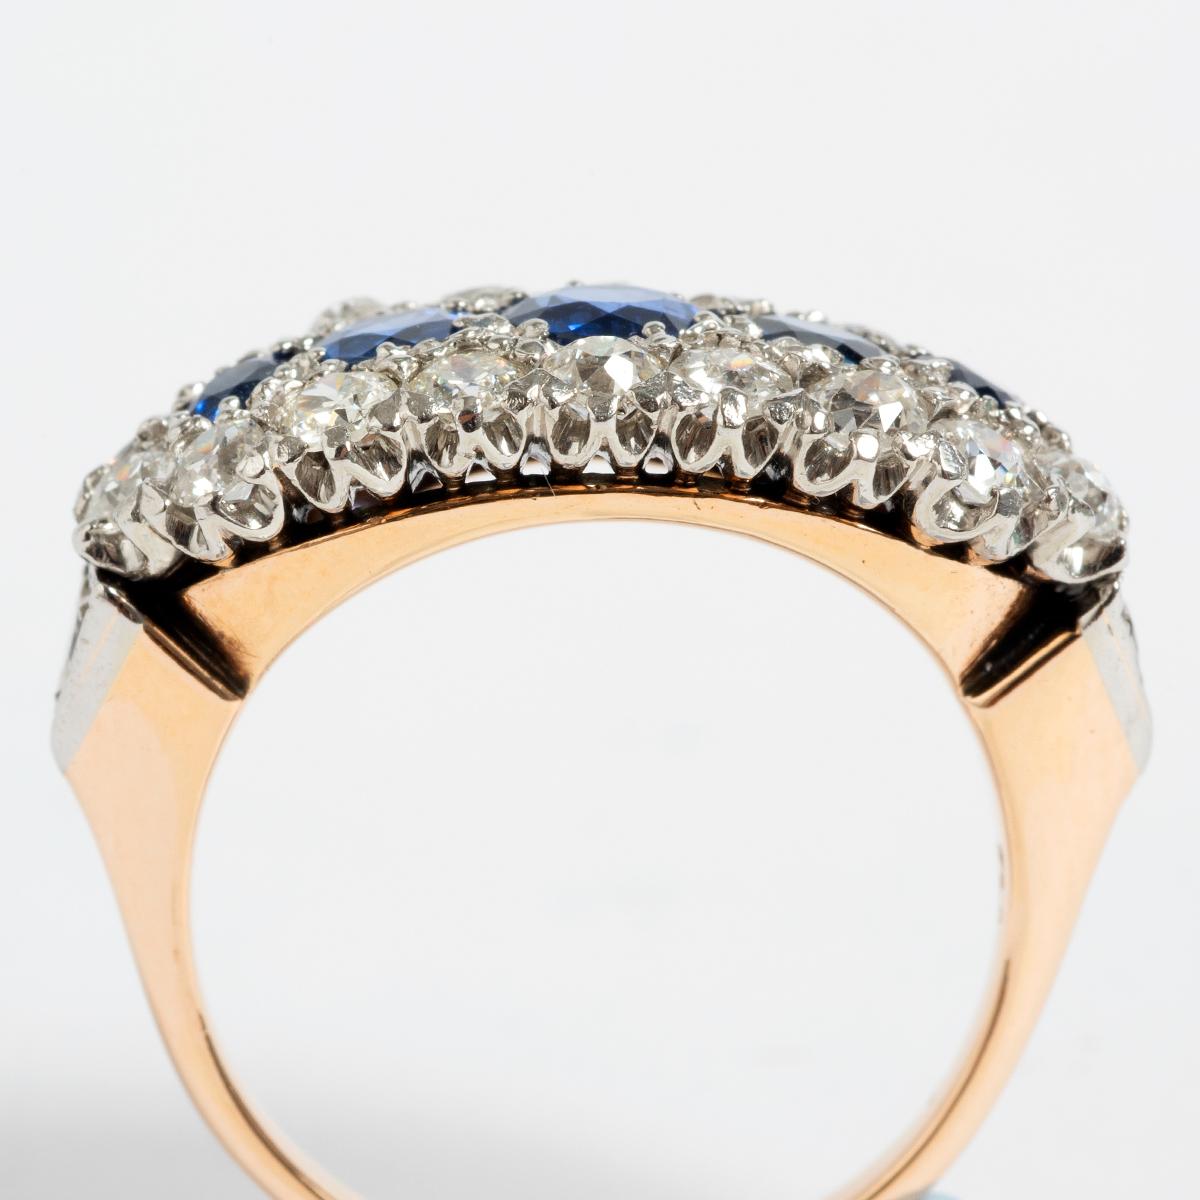 Mixed Cut Victorian Platinum & Sapphire Diamond Ring, 18K Yellow Gold. 1890's. For Sale